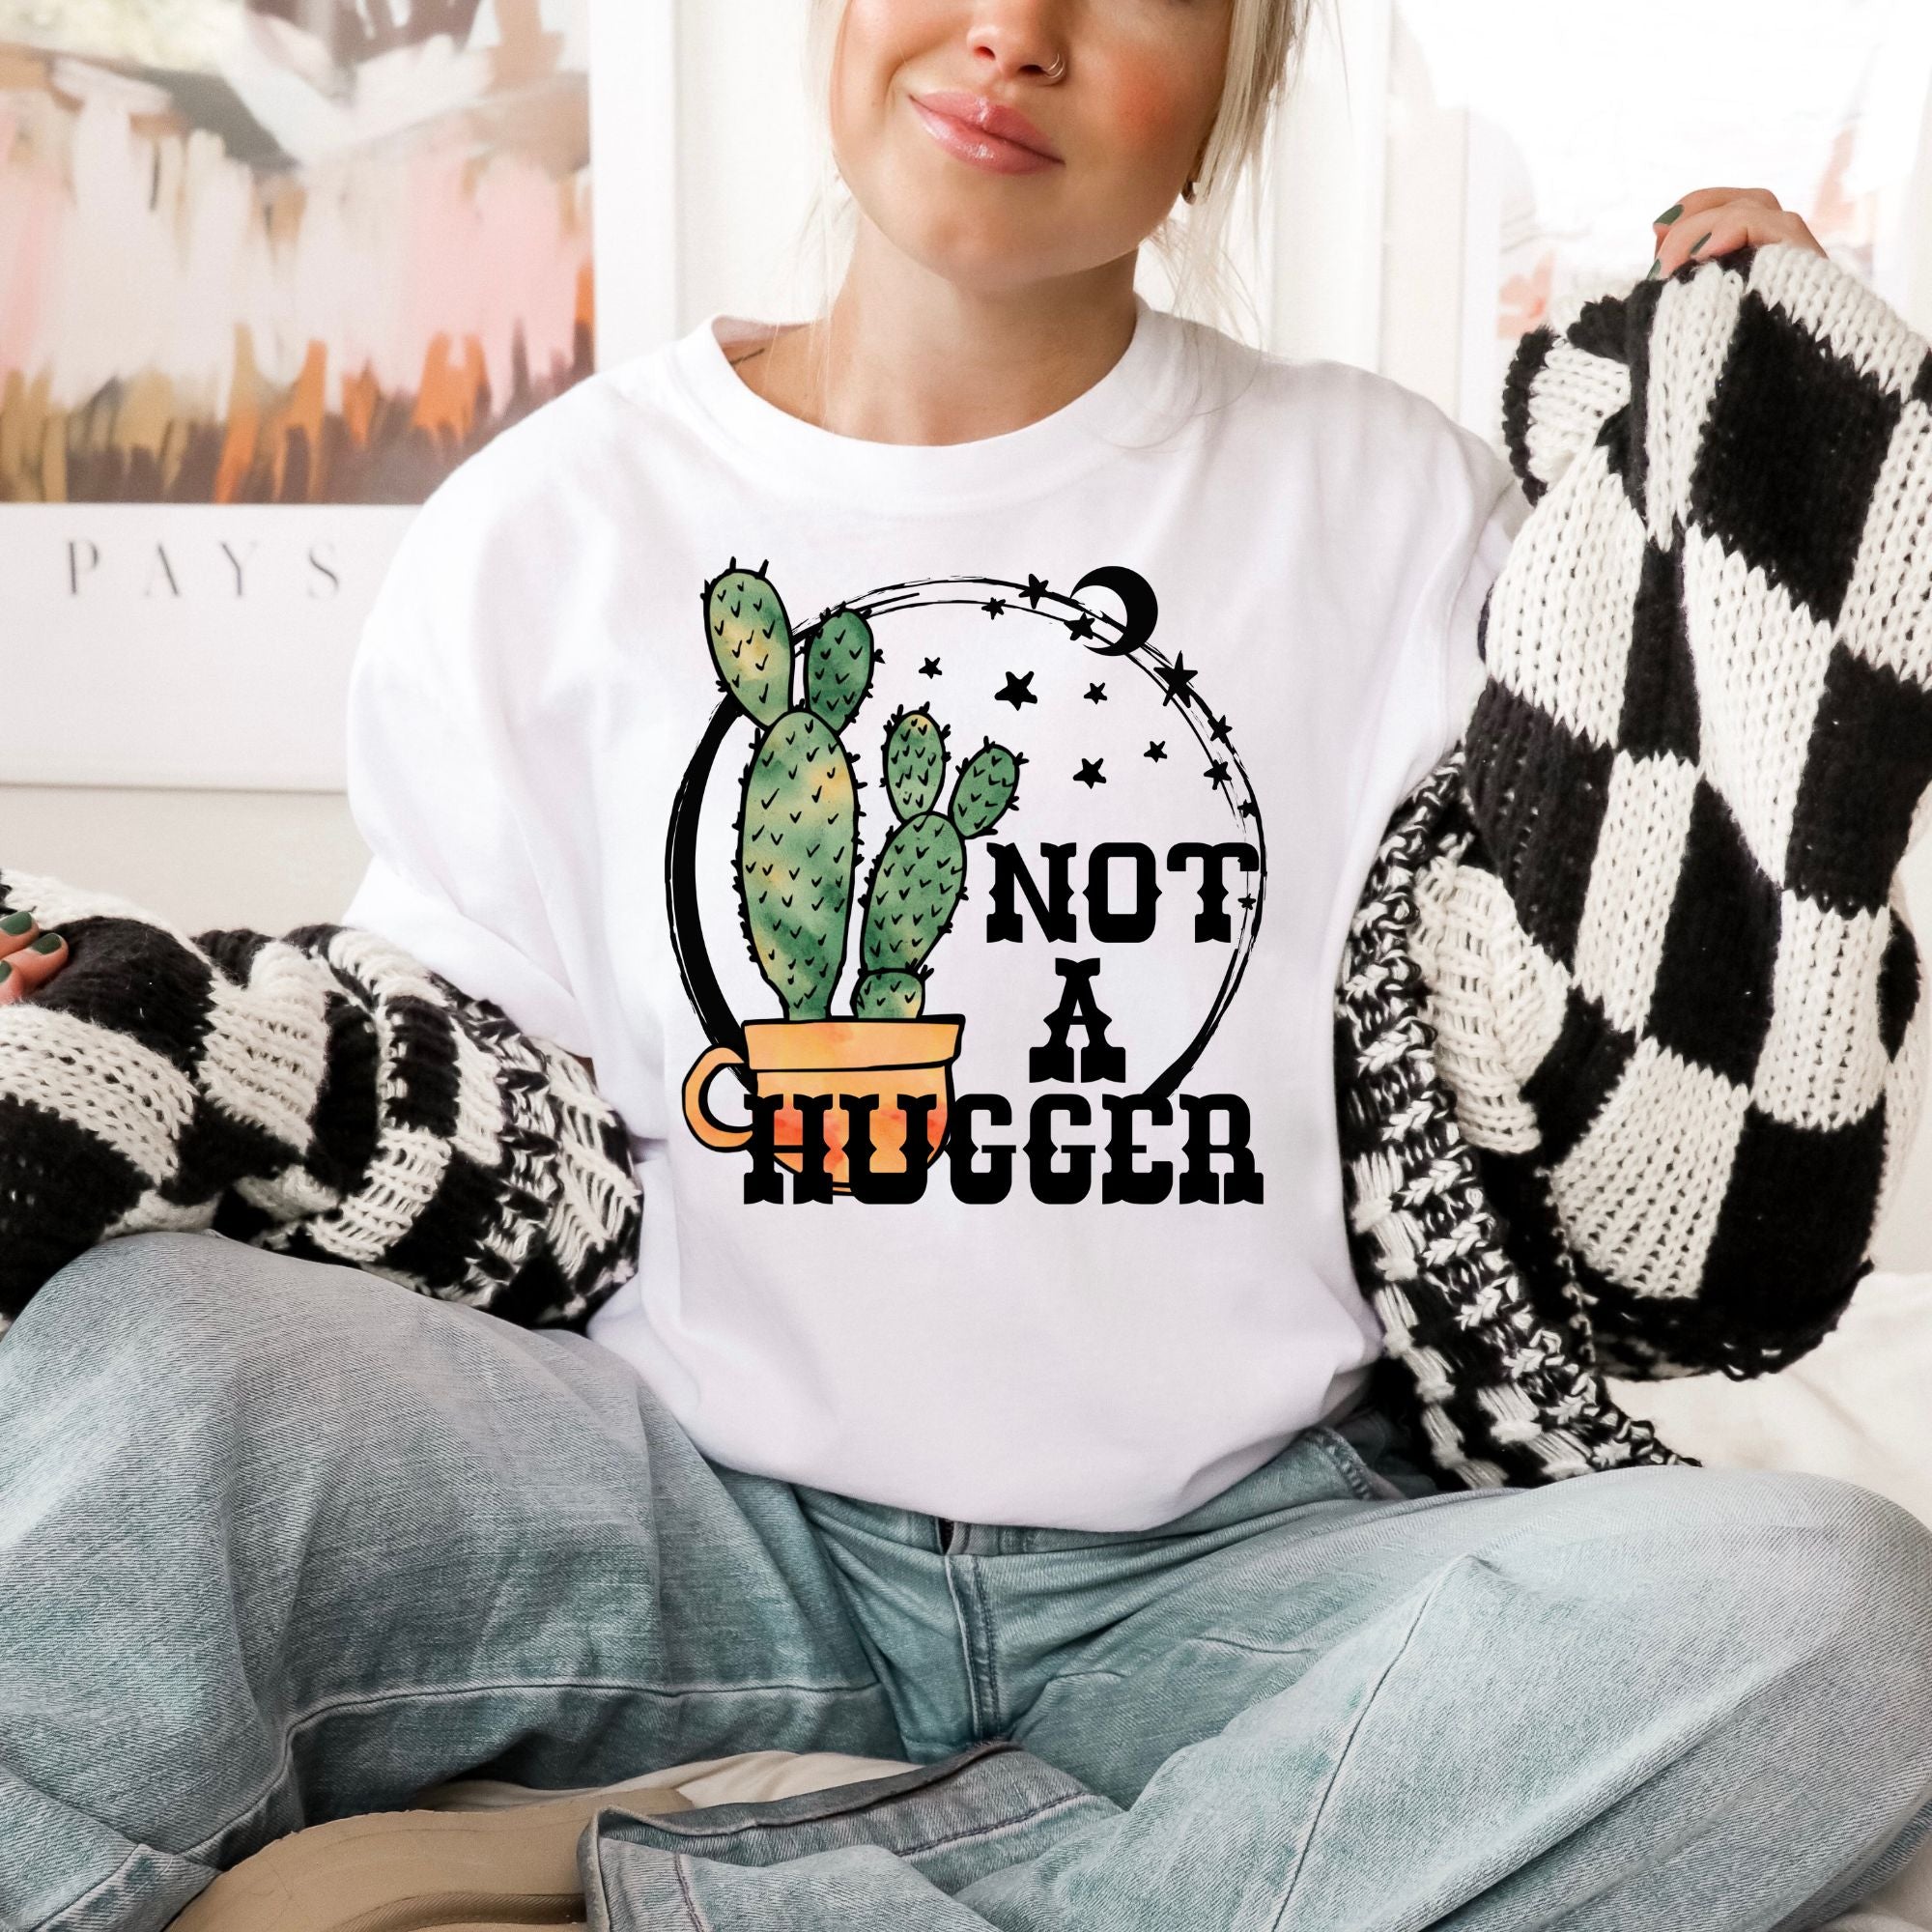 Not A Hugger Funny Cactus Graphic Tee *UNISEX FIT*-Graphic Tees-208 Tees Wholesale, Idaho